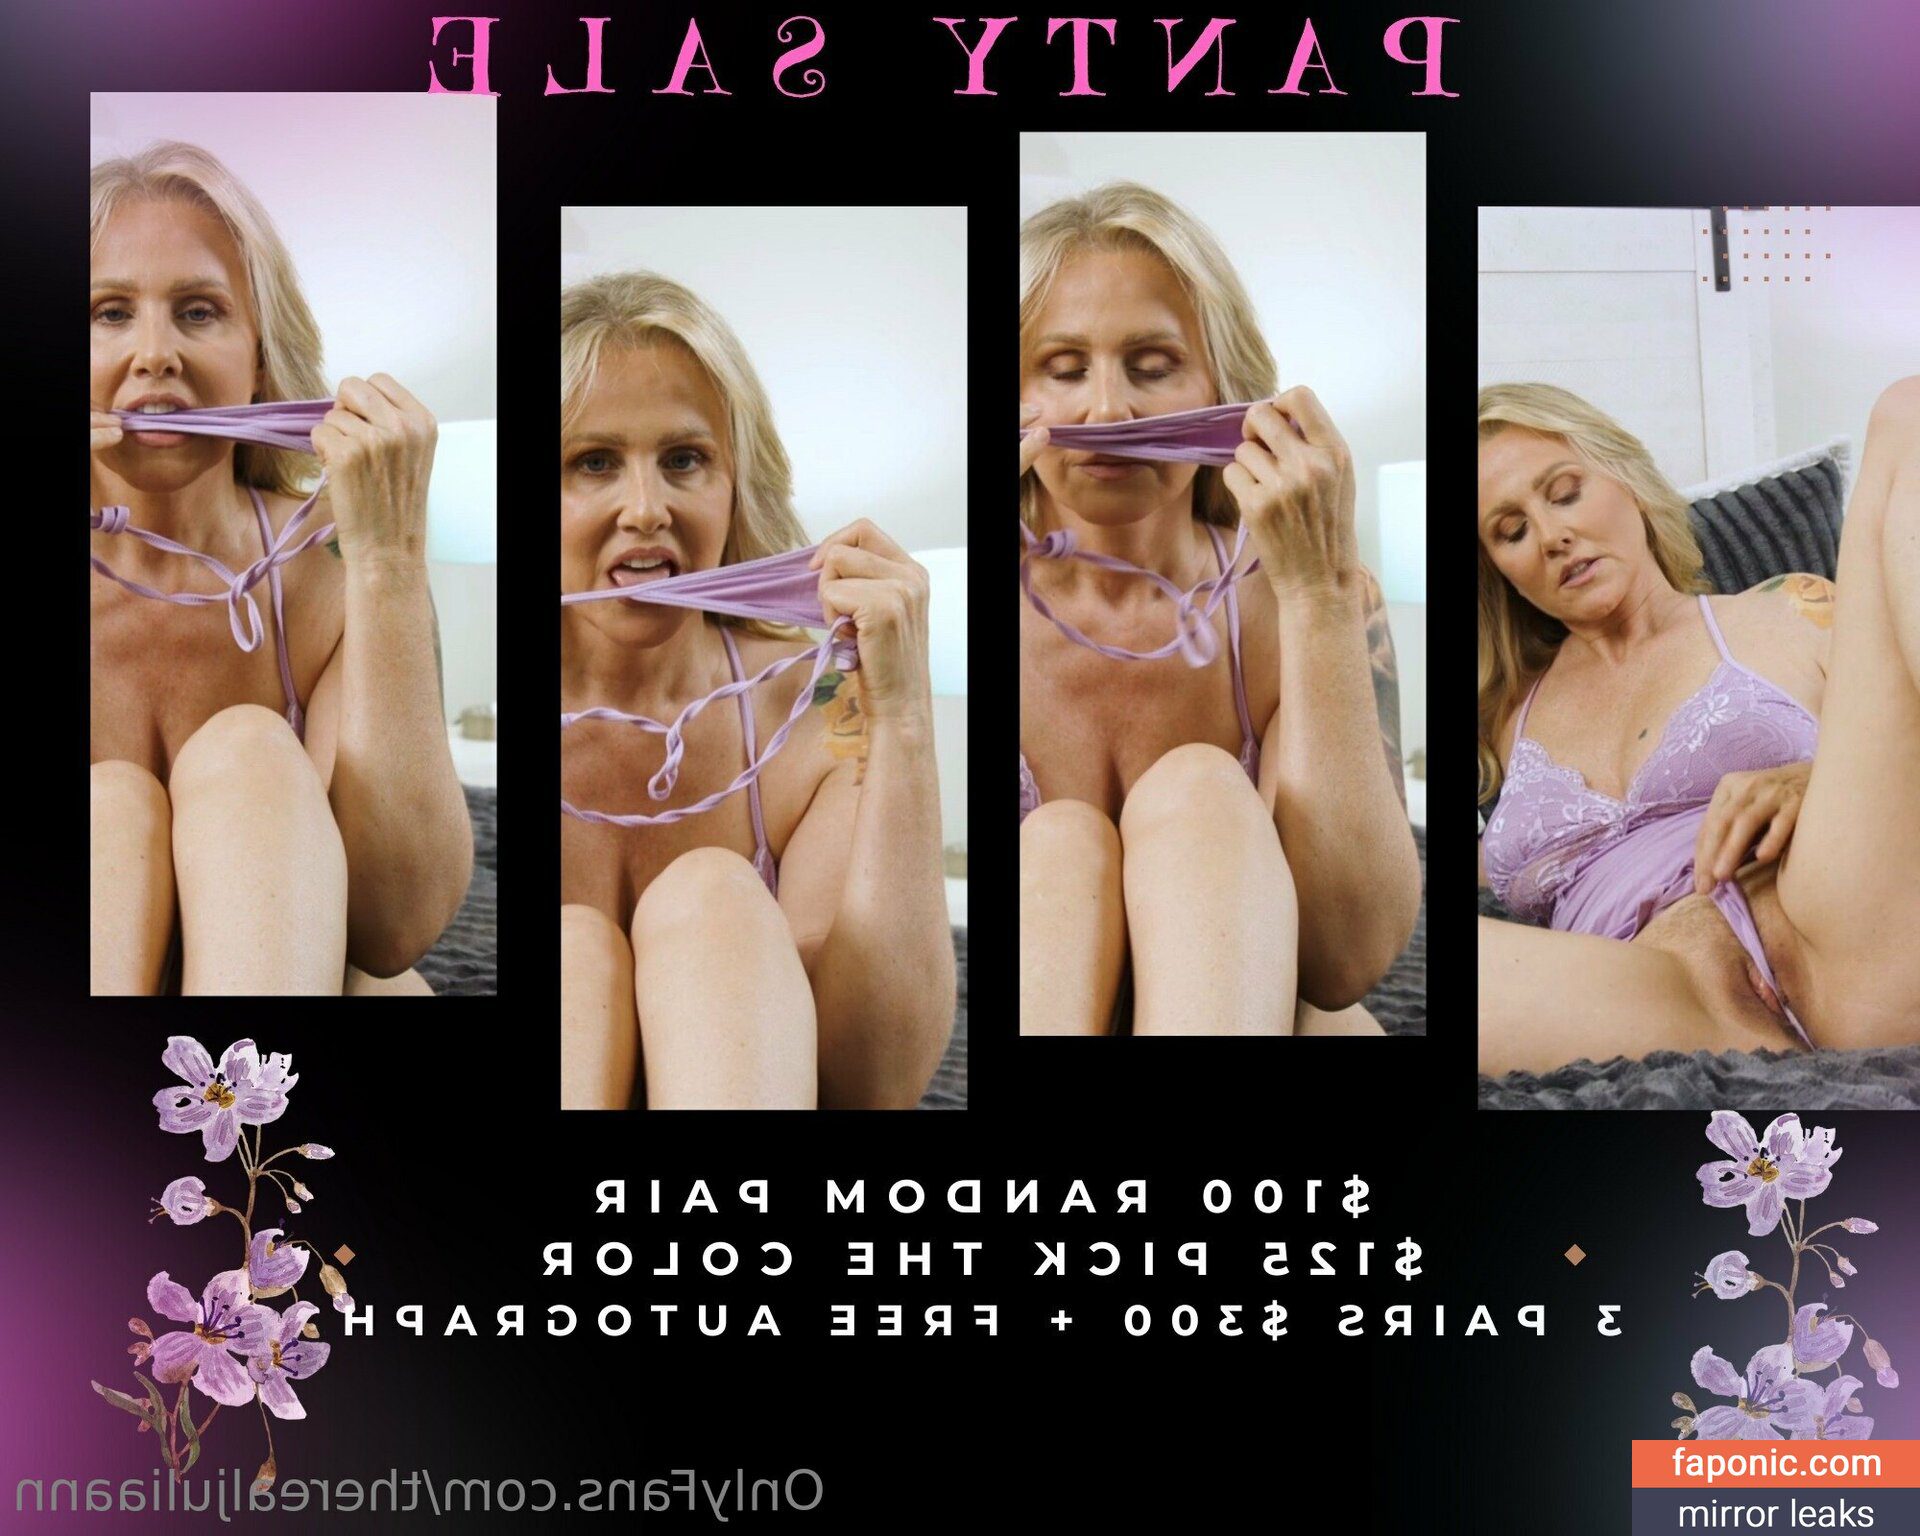 TheRealJuliaAnn leaked photos and videos can be found on Leakwiki. Dive into the steamy content from OnlyFans leak in high quality. Access the exclusive material on the website and enjoy the explicit images of TheRealJuliaAnn. Don't miss out on the uncensored leak content available for viewing. Unlock the private collection and indulge in the intimate moments captured in the leaked photos and videos. Explore the enticing world of TheRealJuliaAnn on Leakwiki now.